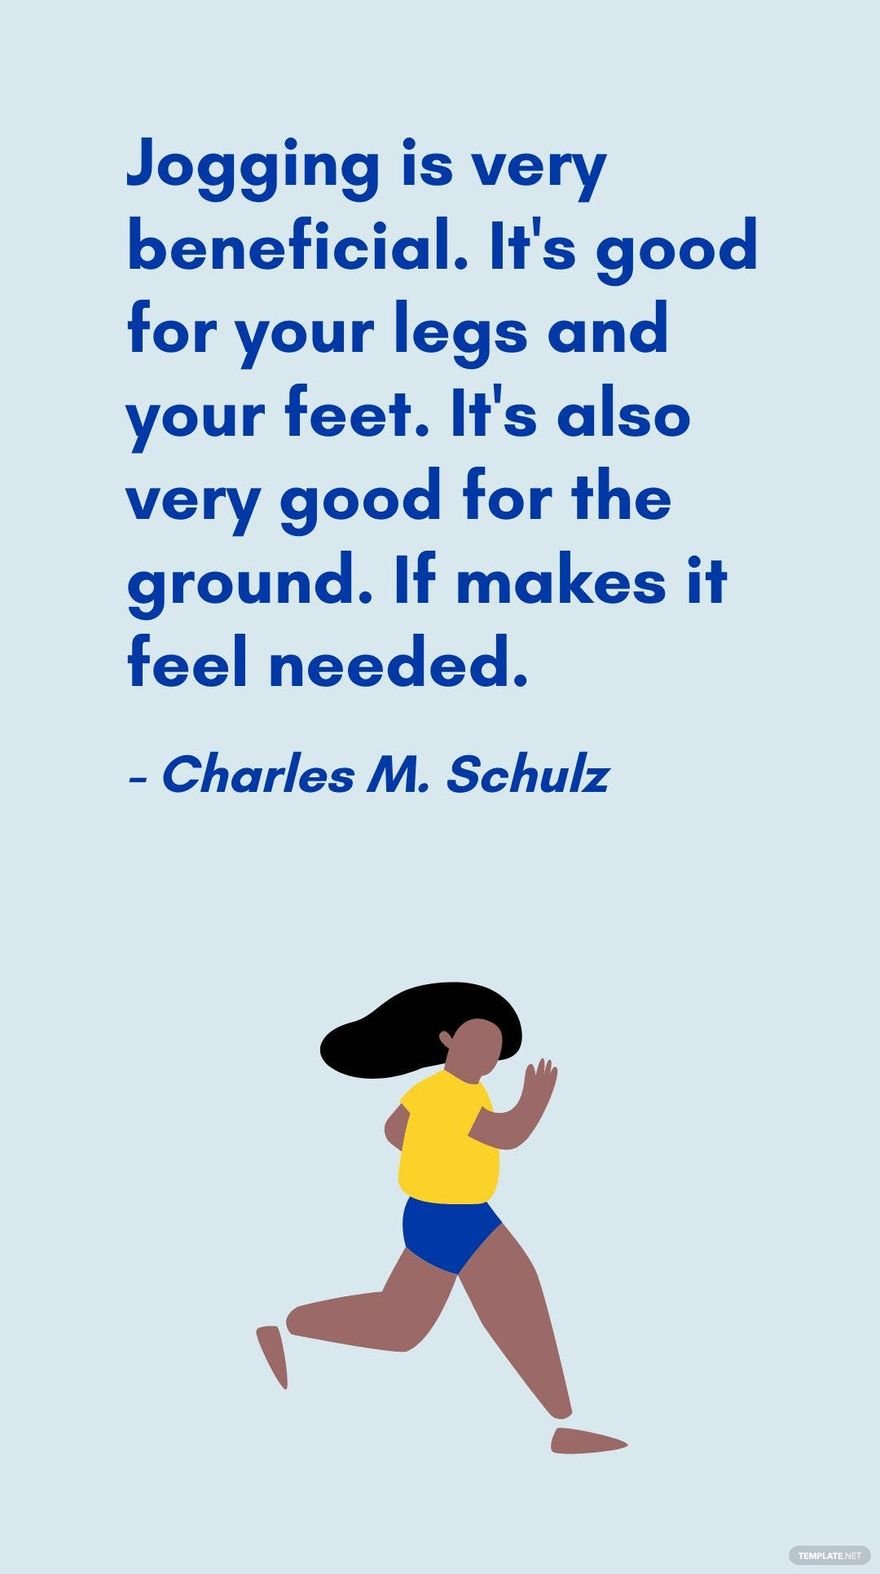 Free Charles M. Schulz - Jogging is very beneficial. It's good for your legs and your feet. It's also very good for the ground. If makes it feel needed. in JPG